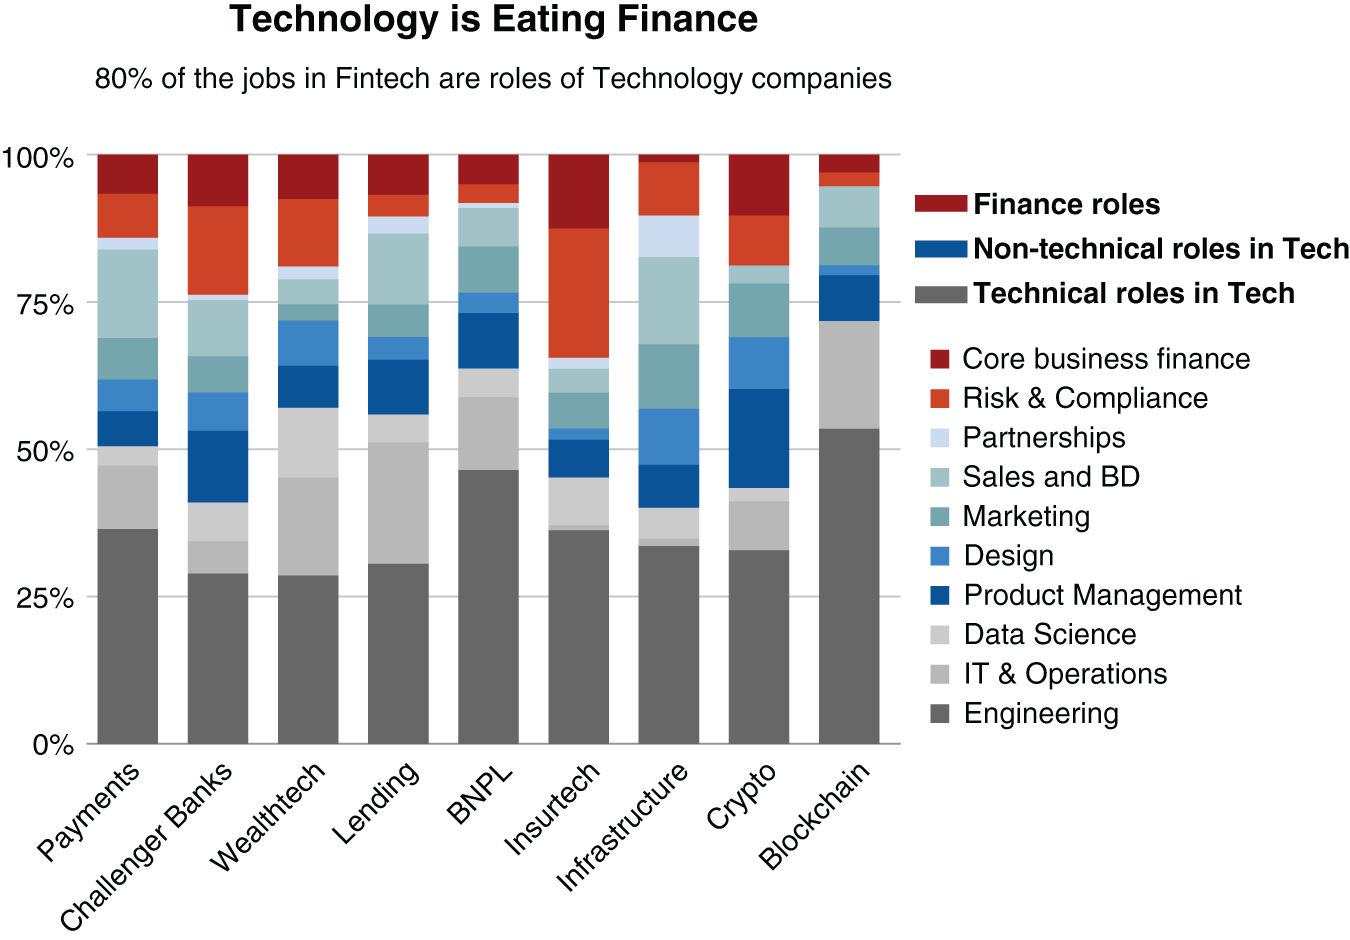 Schematic illustration of technology is eating finance.